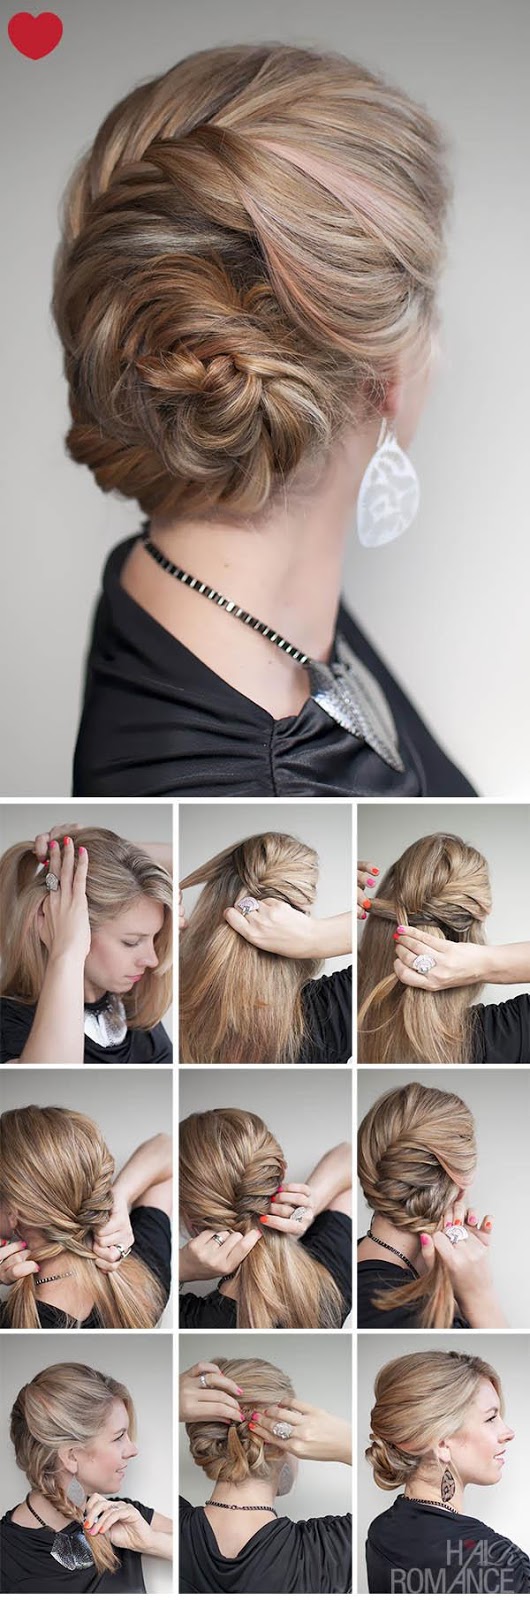 New Short Hair Styles How To Make French fishtail braid